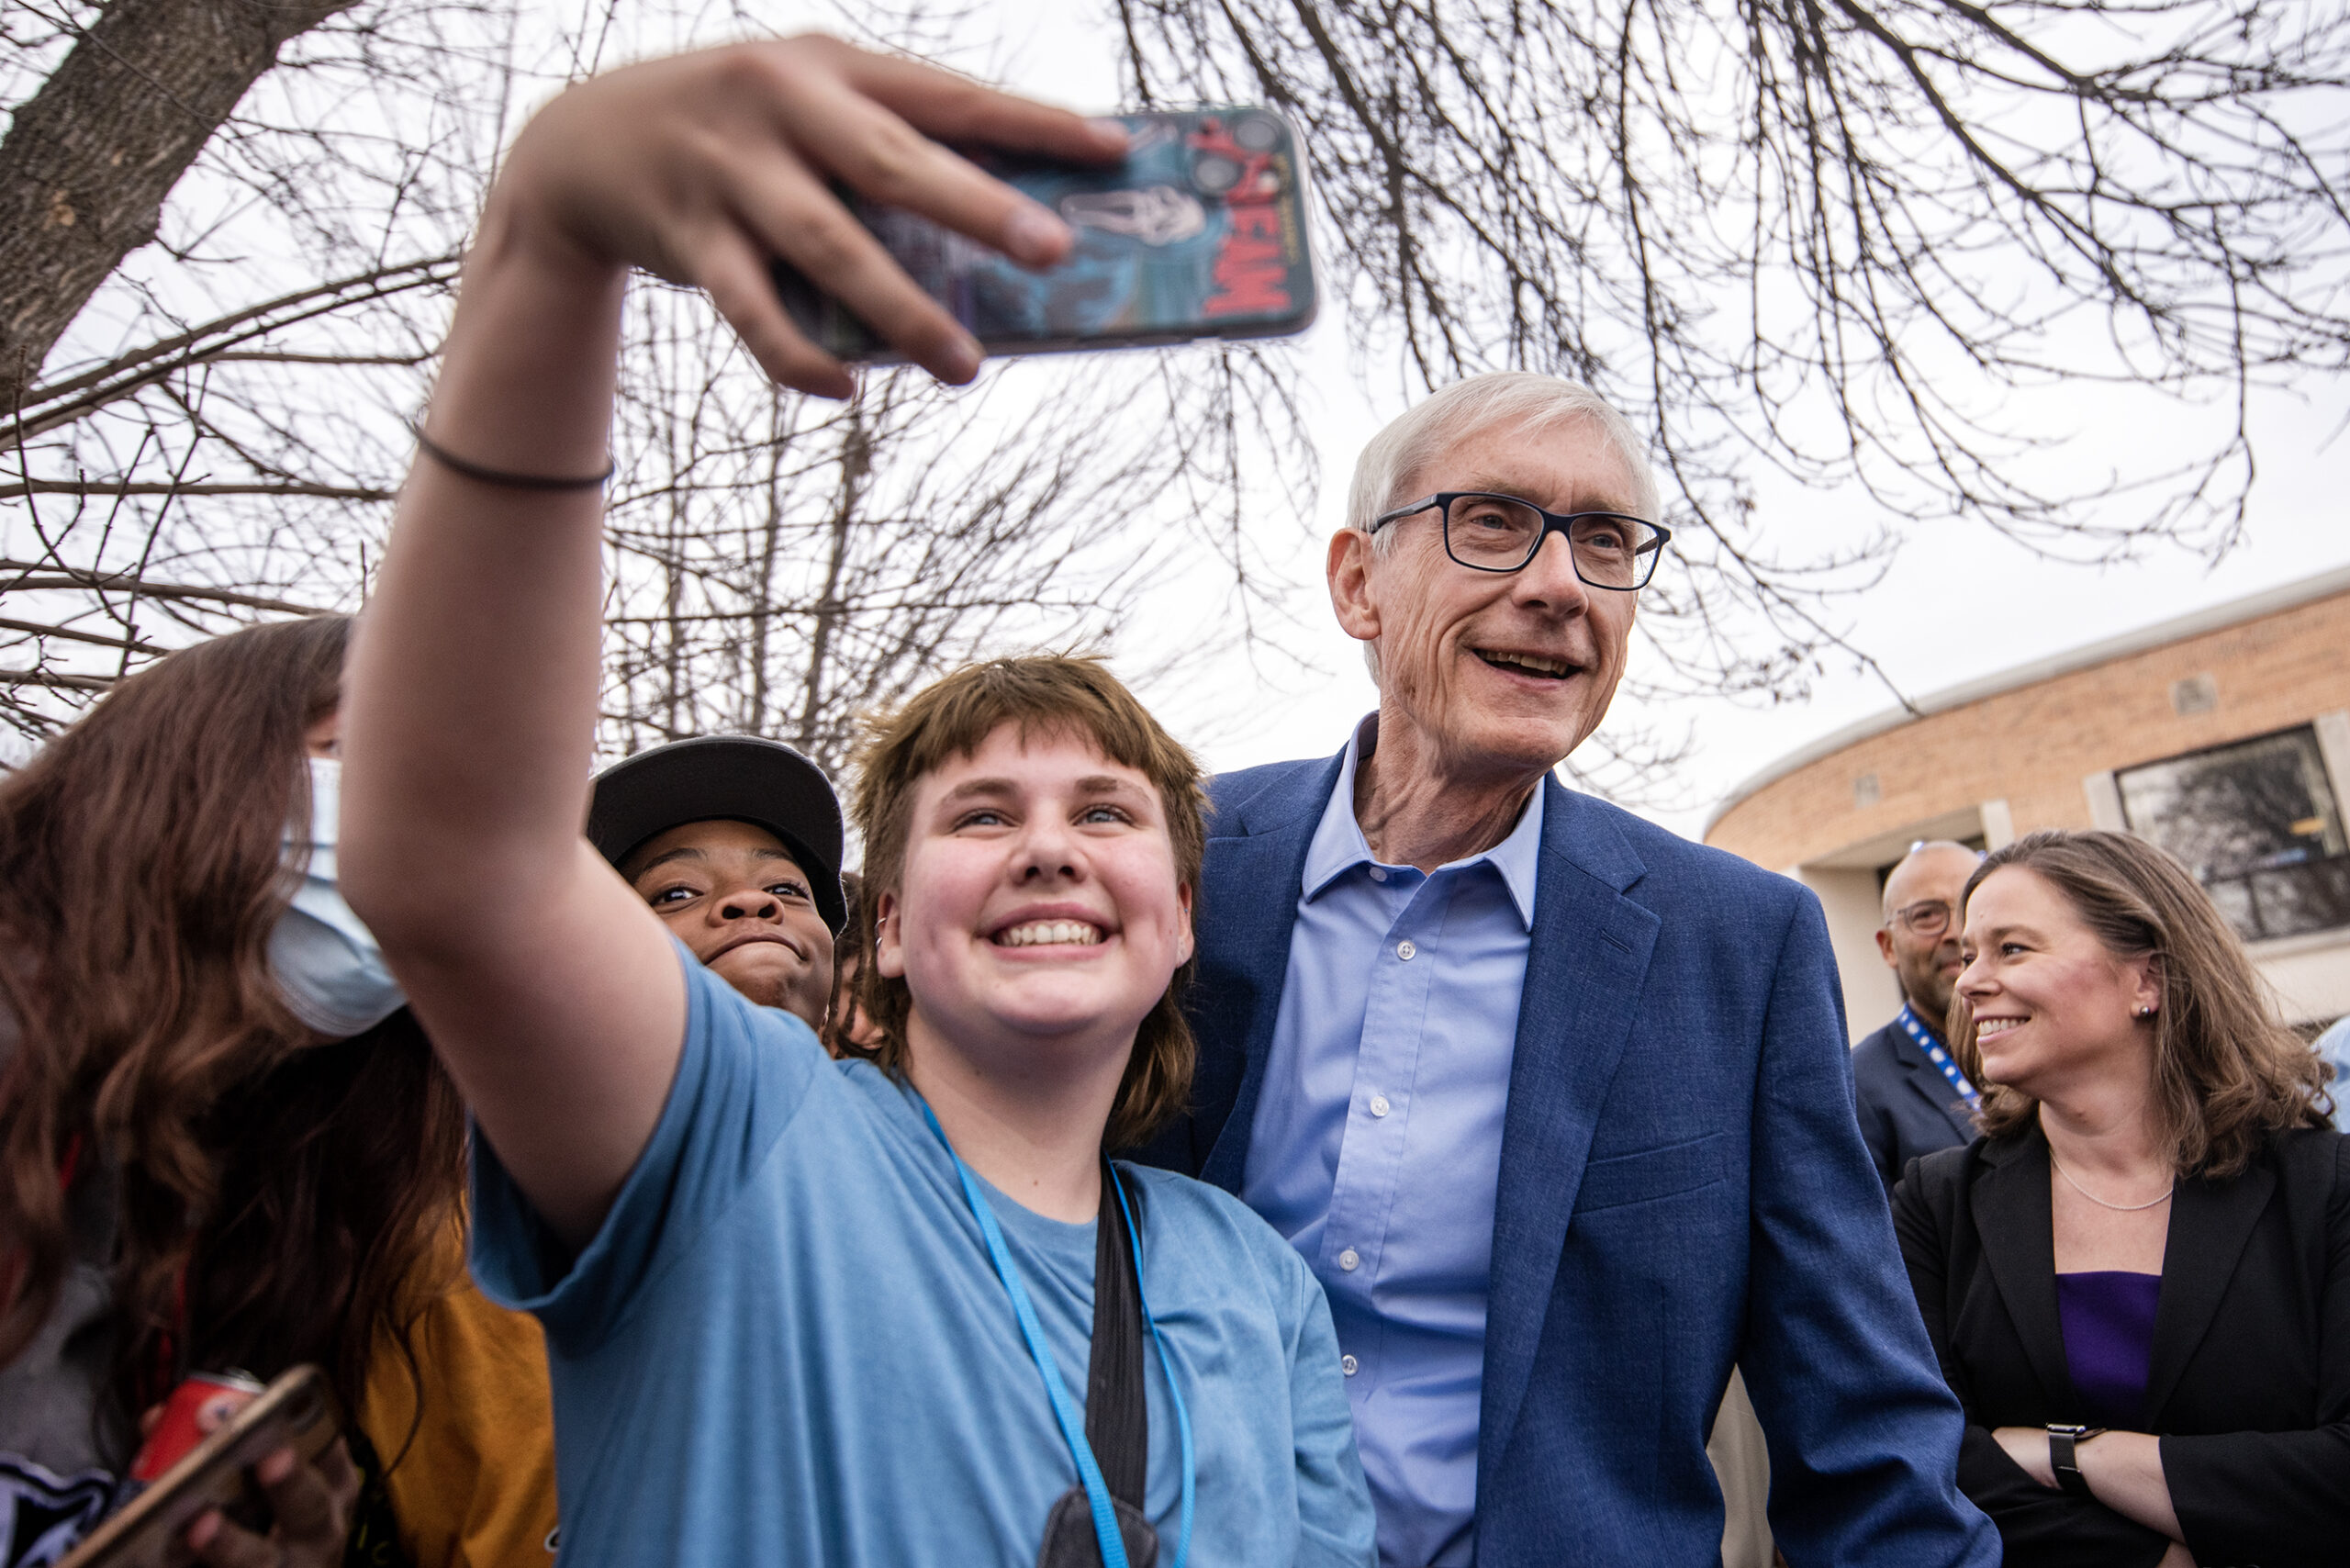 A student holds up a phone to take a selfie with Gov. Evers. Other students gather around to get in the photo.